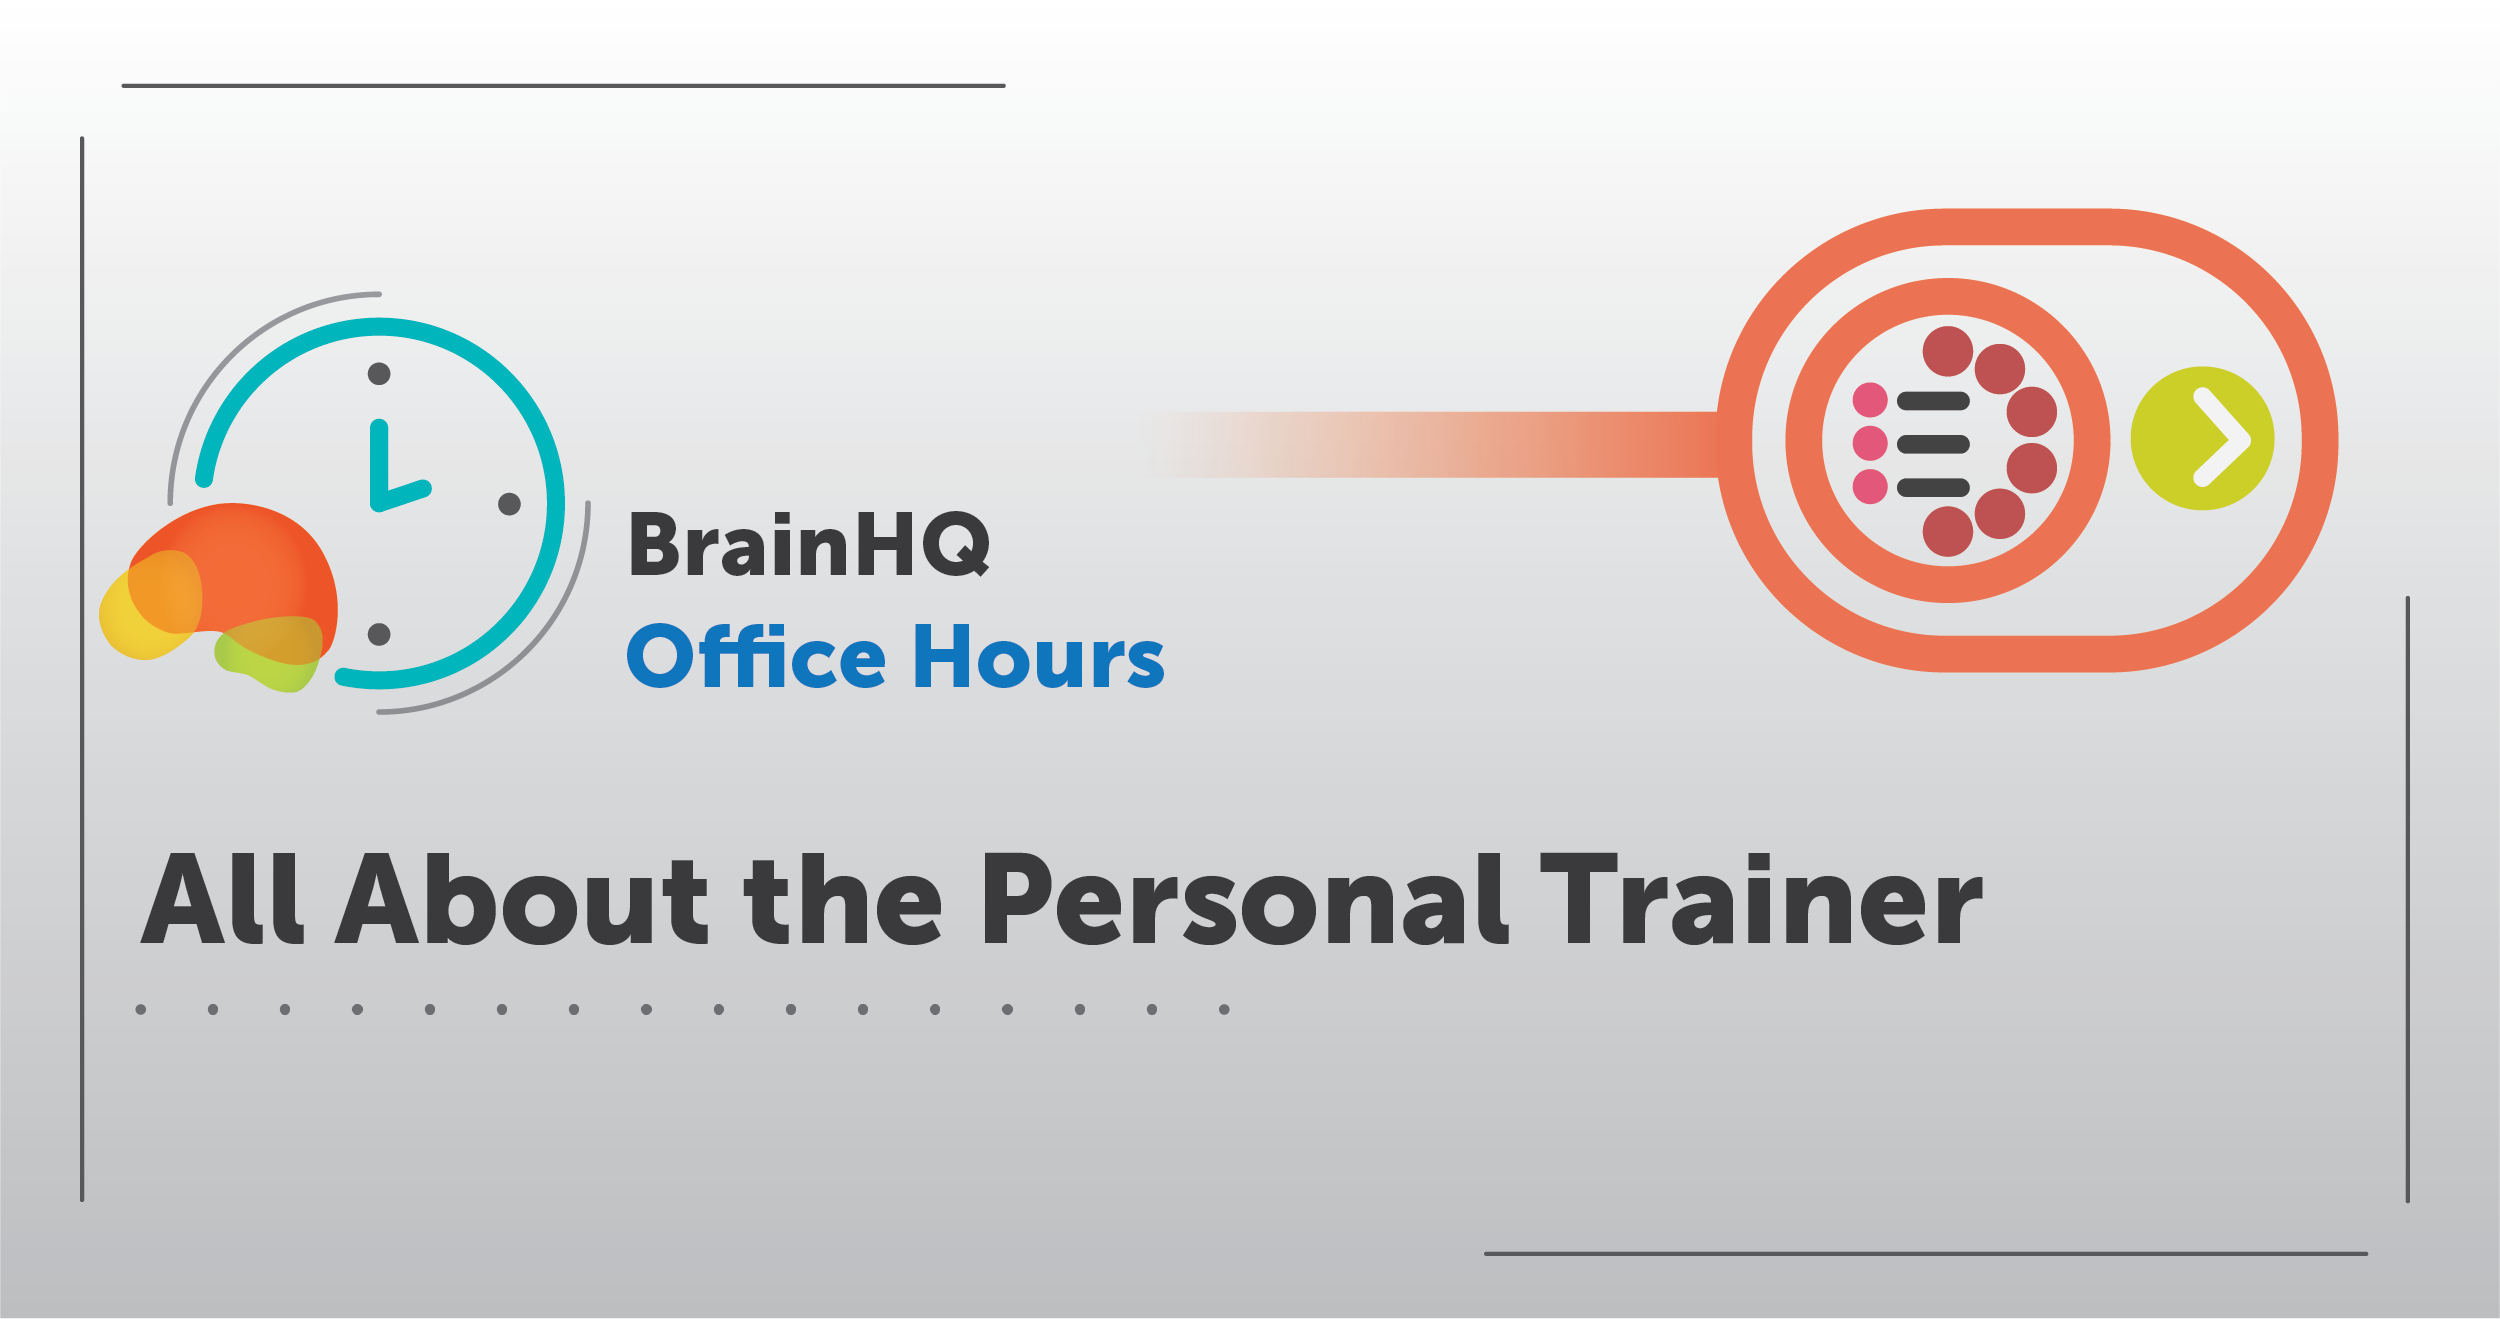 How to Use the BrainHQ Personal Trainer